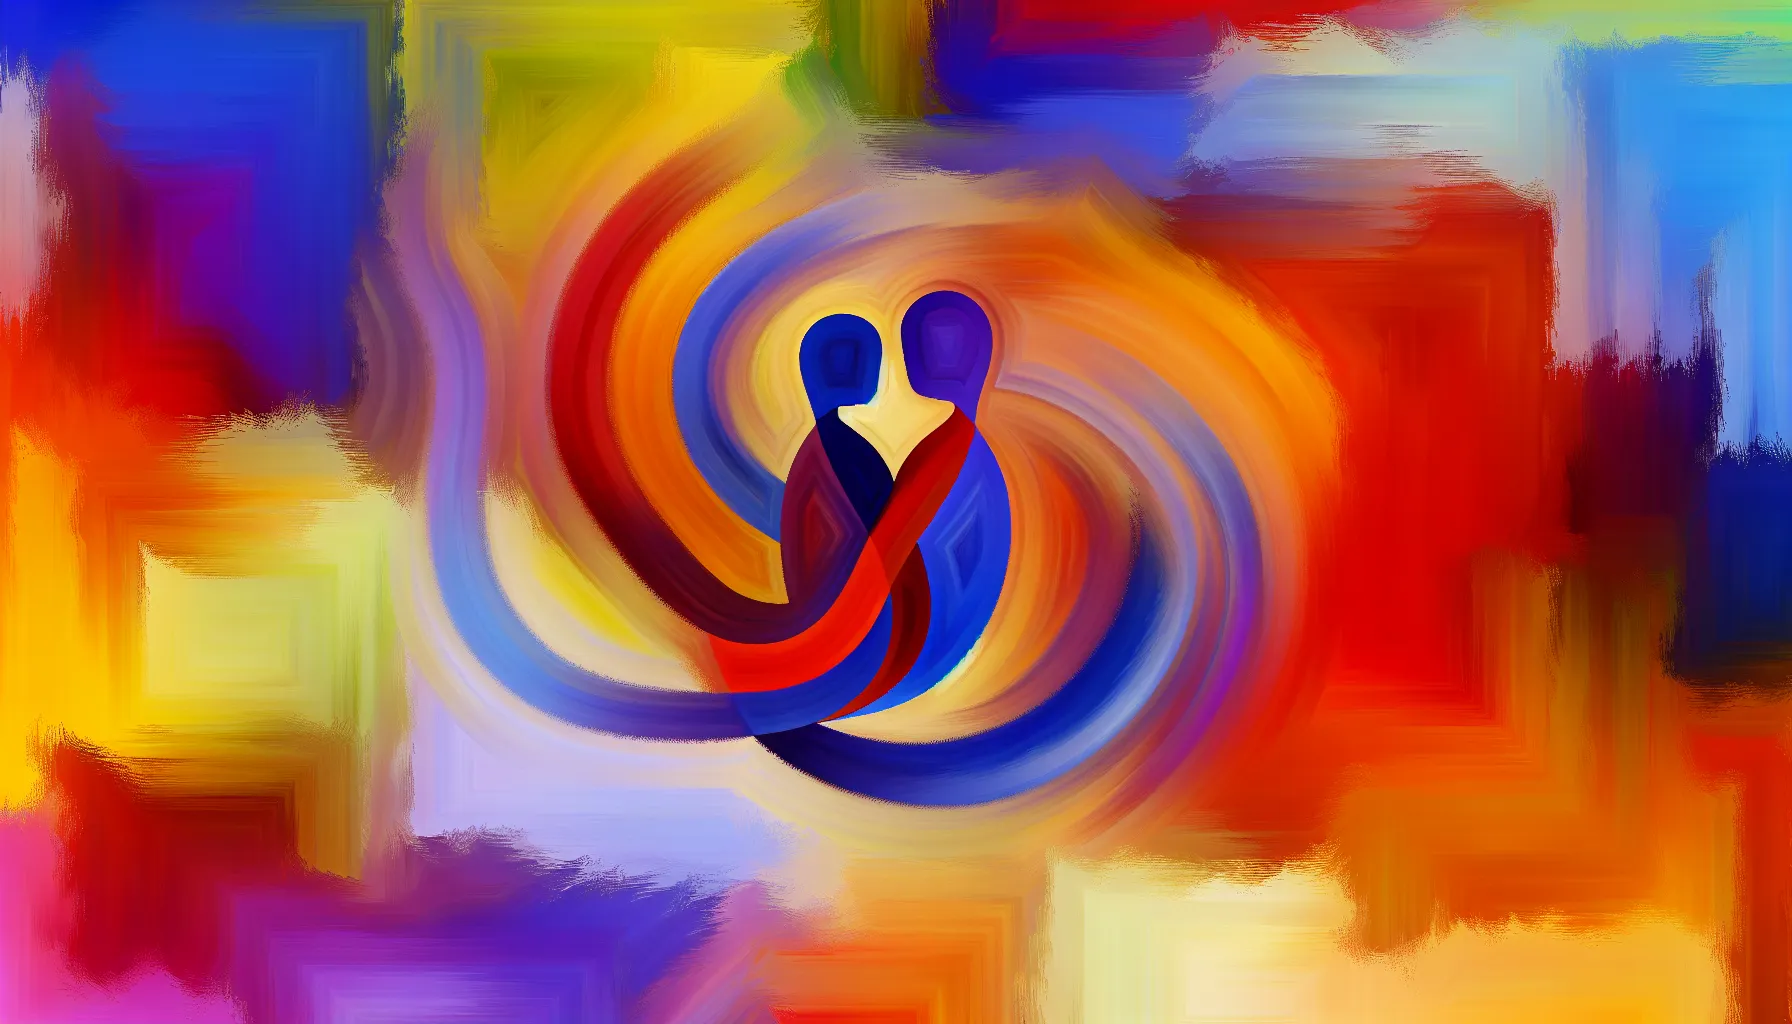 Abstract image of togetherness and celebration